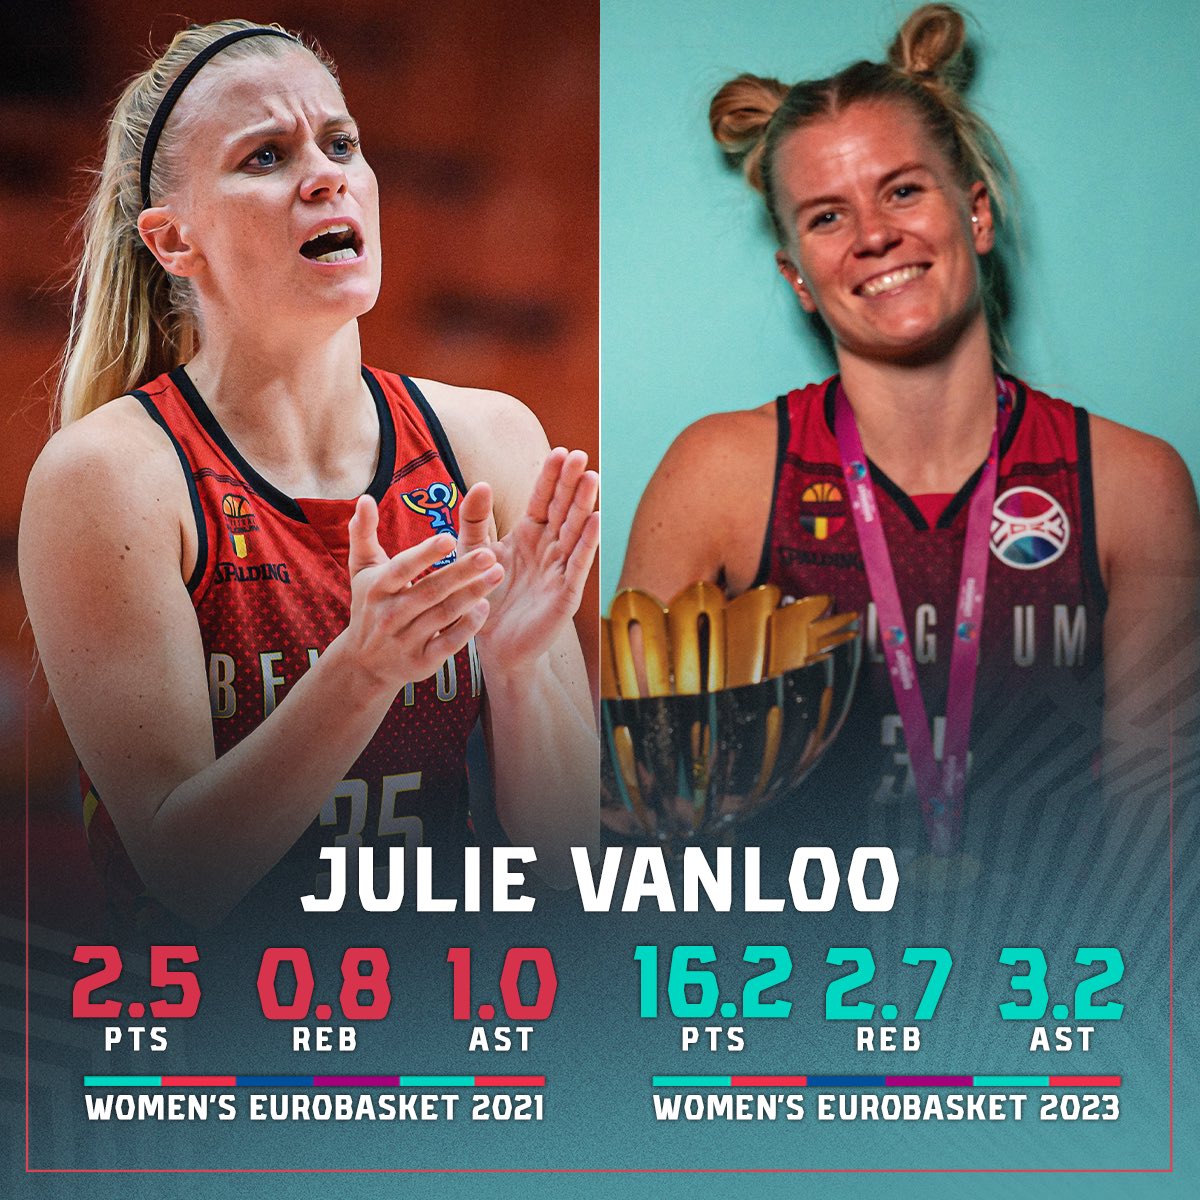 Dare to dream ❤️ From role player in 2021 to #EuroBasketWomen All-Star 5 in 2023, Julie Vanloo is an inspiration for everyone. 🥹